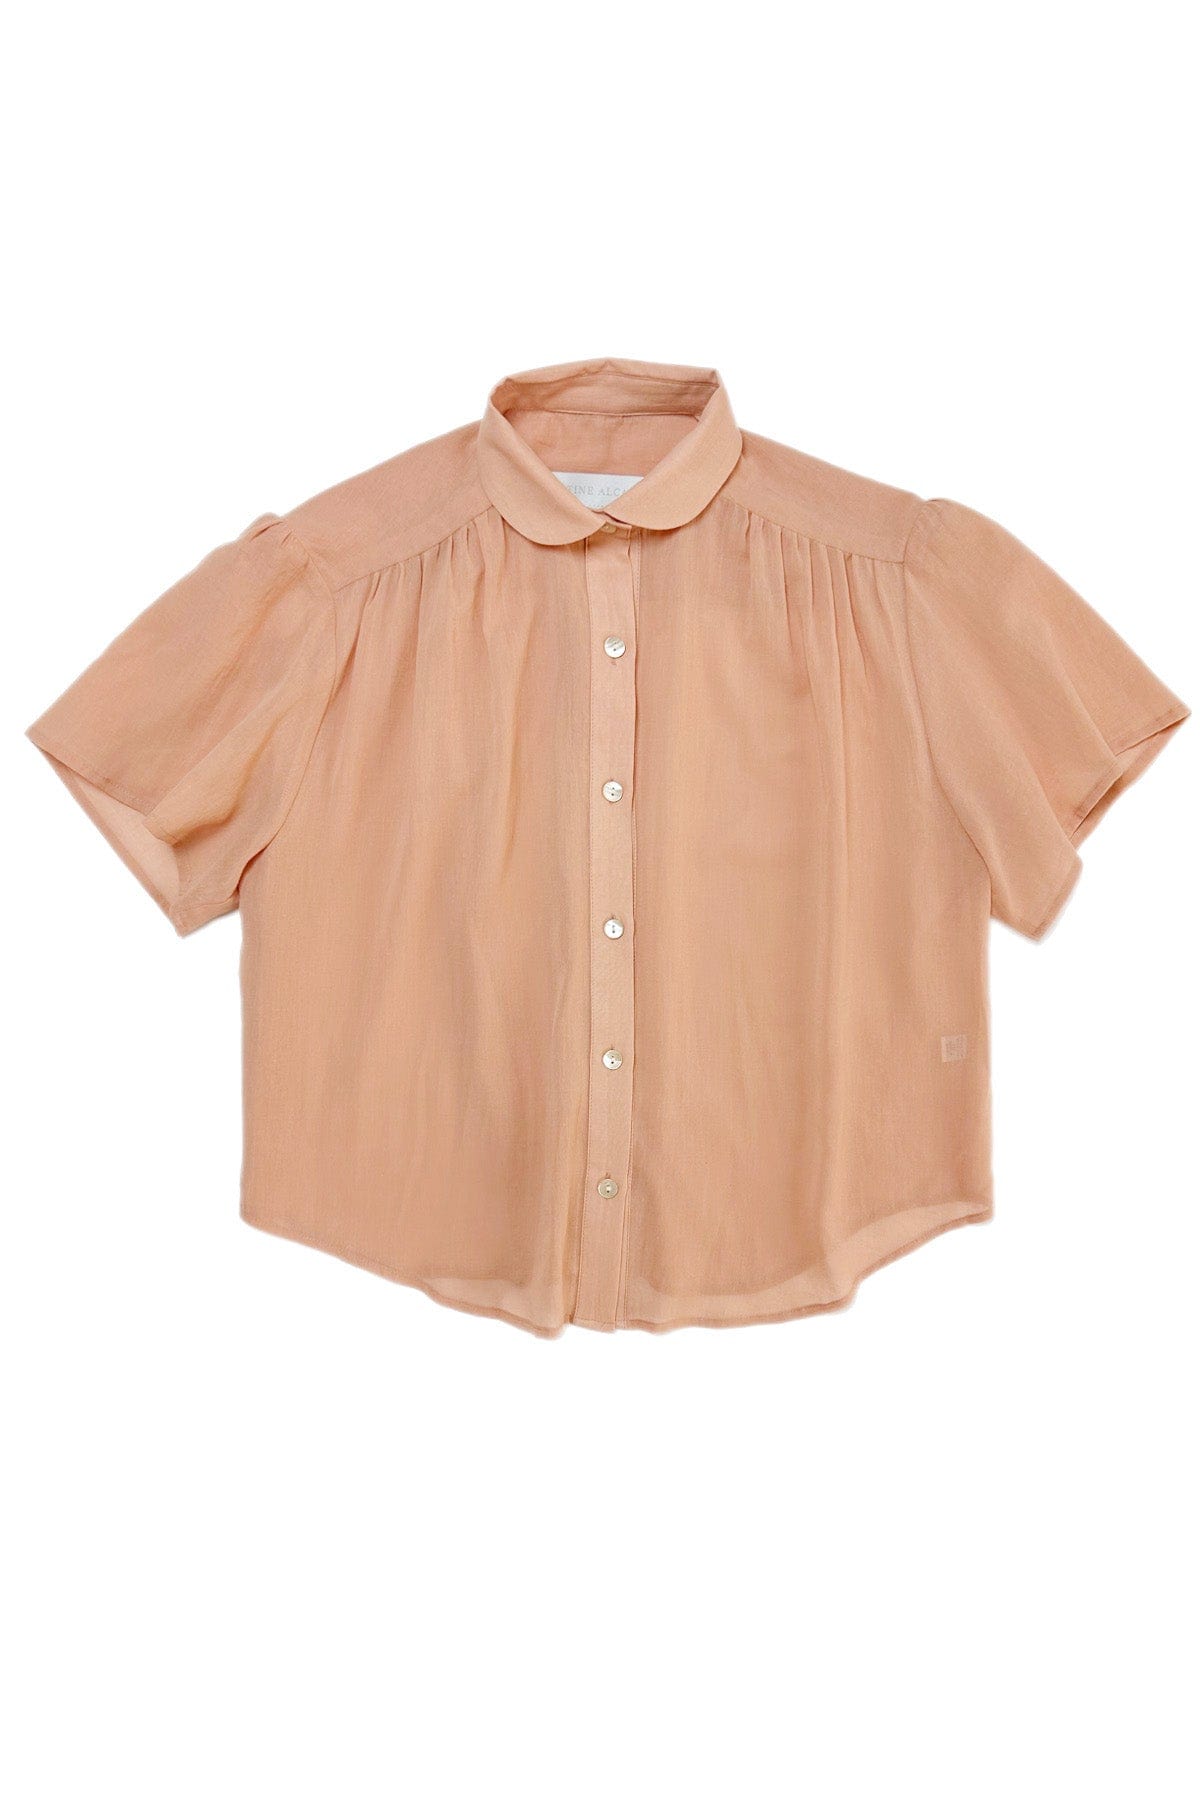 Georgina Blouse in Cotton Chiffon Blouses CHRISTINE ALCALAY Vintage Rose Extra Small 